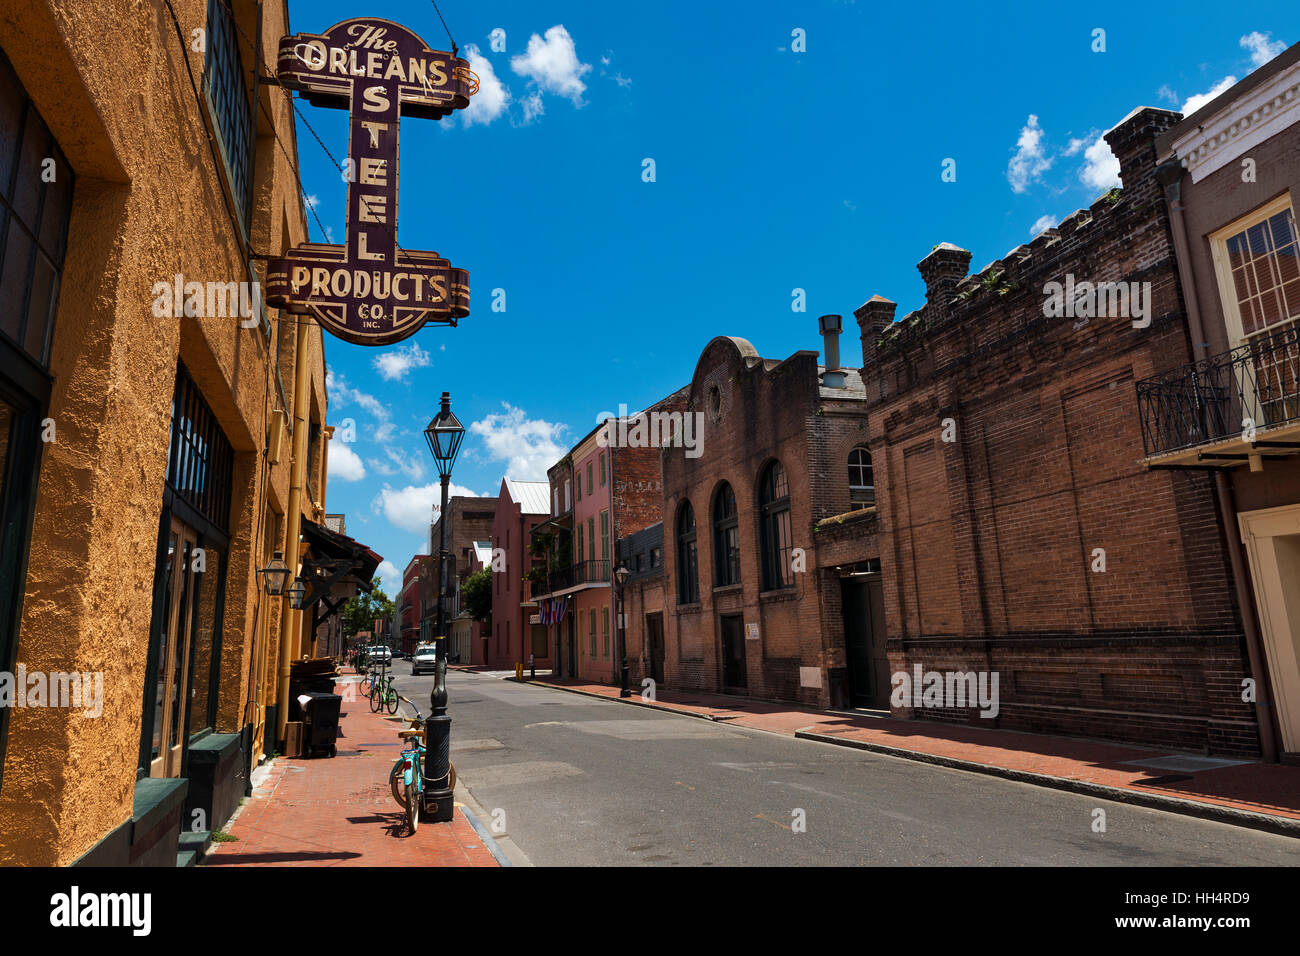 New Orleans, Louisiana, USA - June 17, 2014: View of a street in the French Quarter in the city of New Orleans, Louisiana. Stock Photo